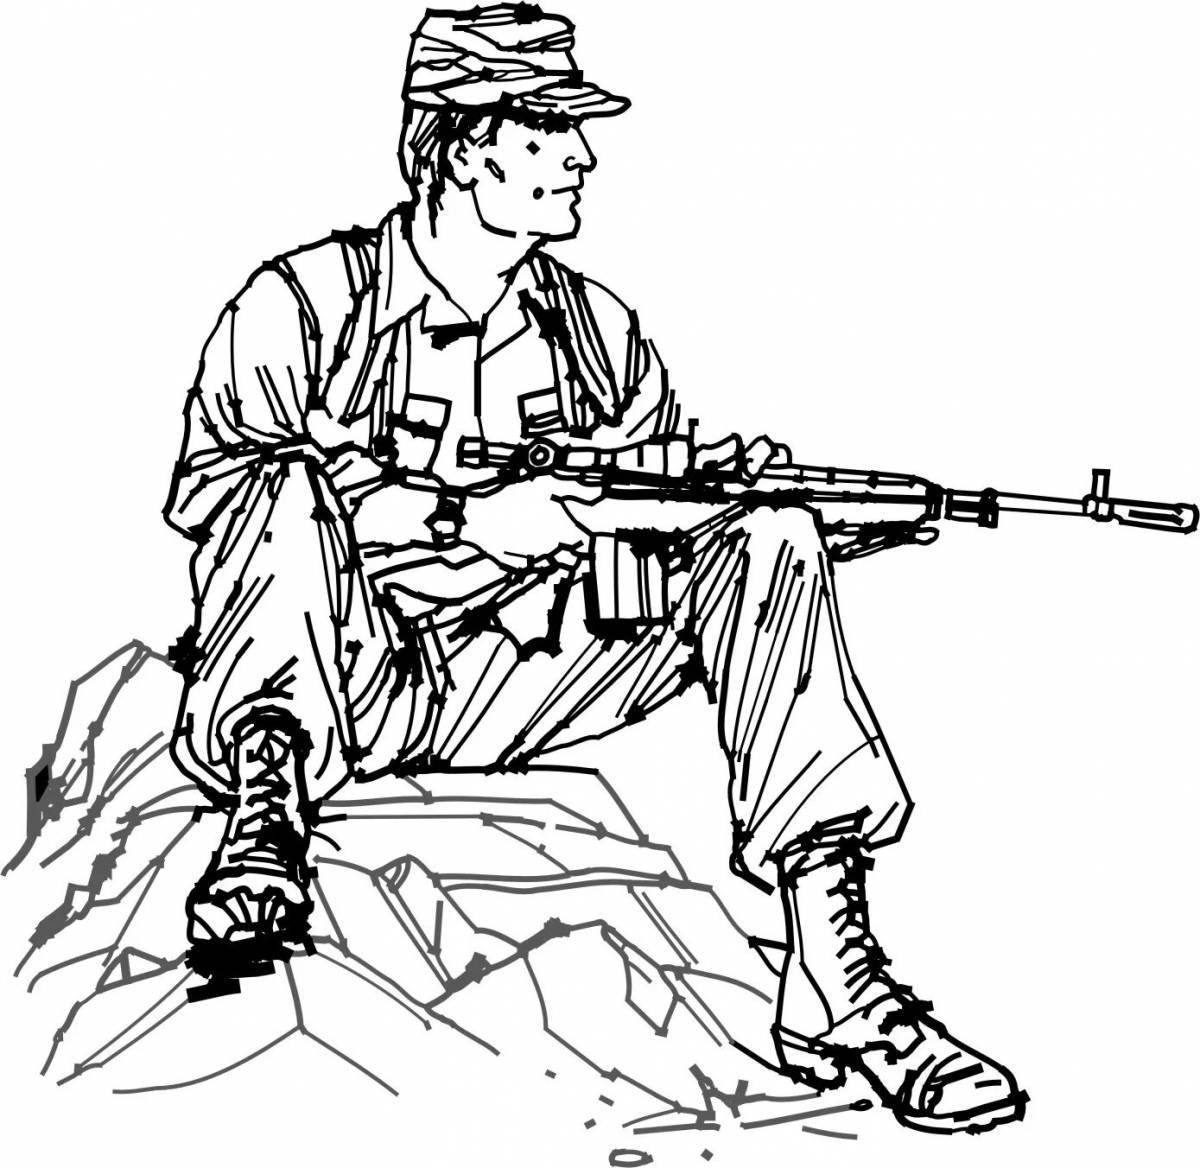 Coloring page amazing hunter with a gun